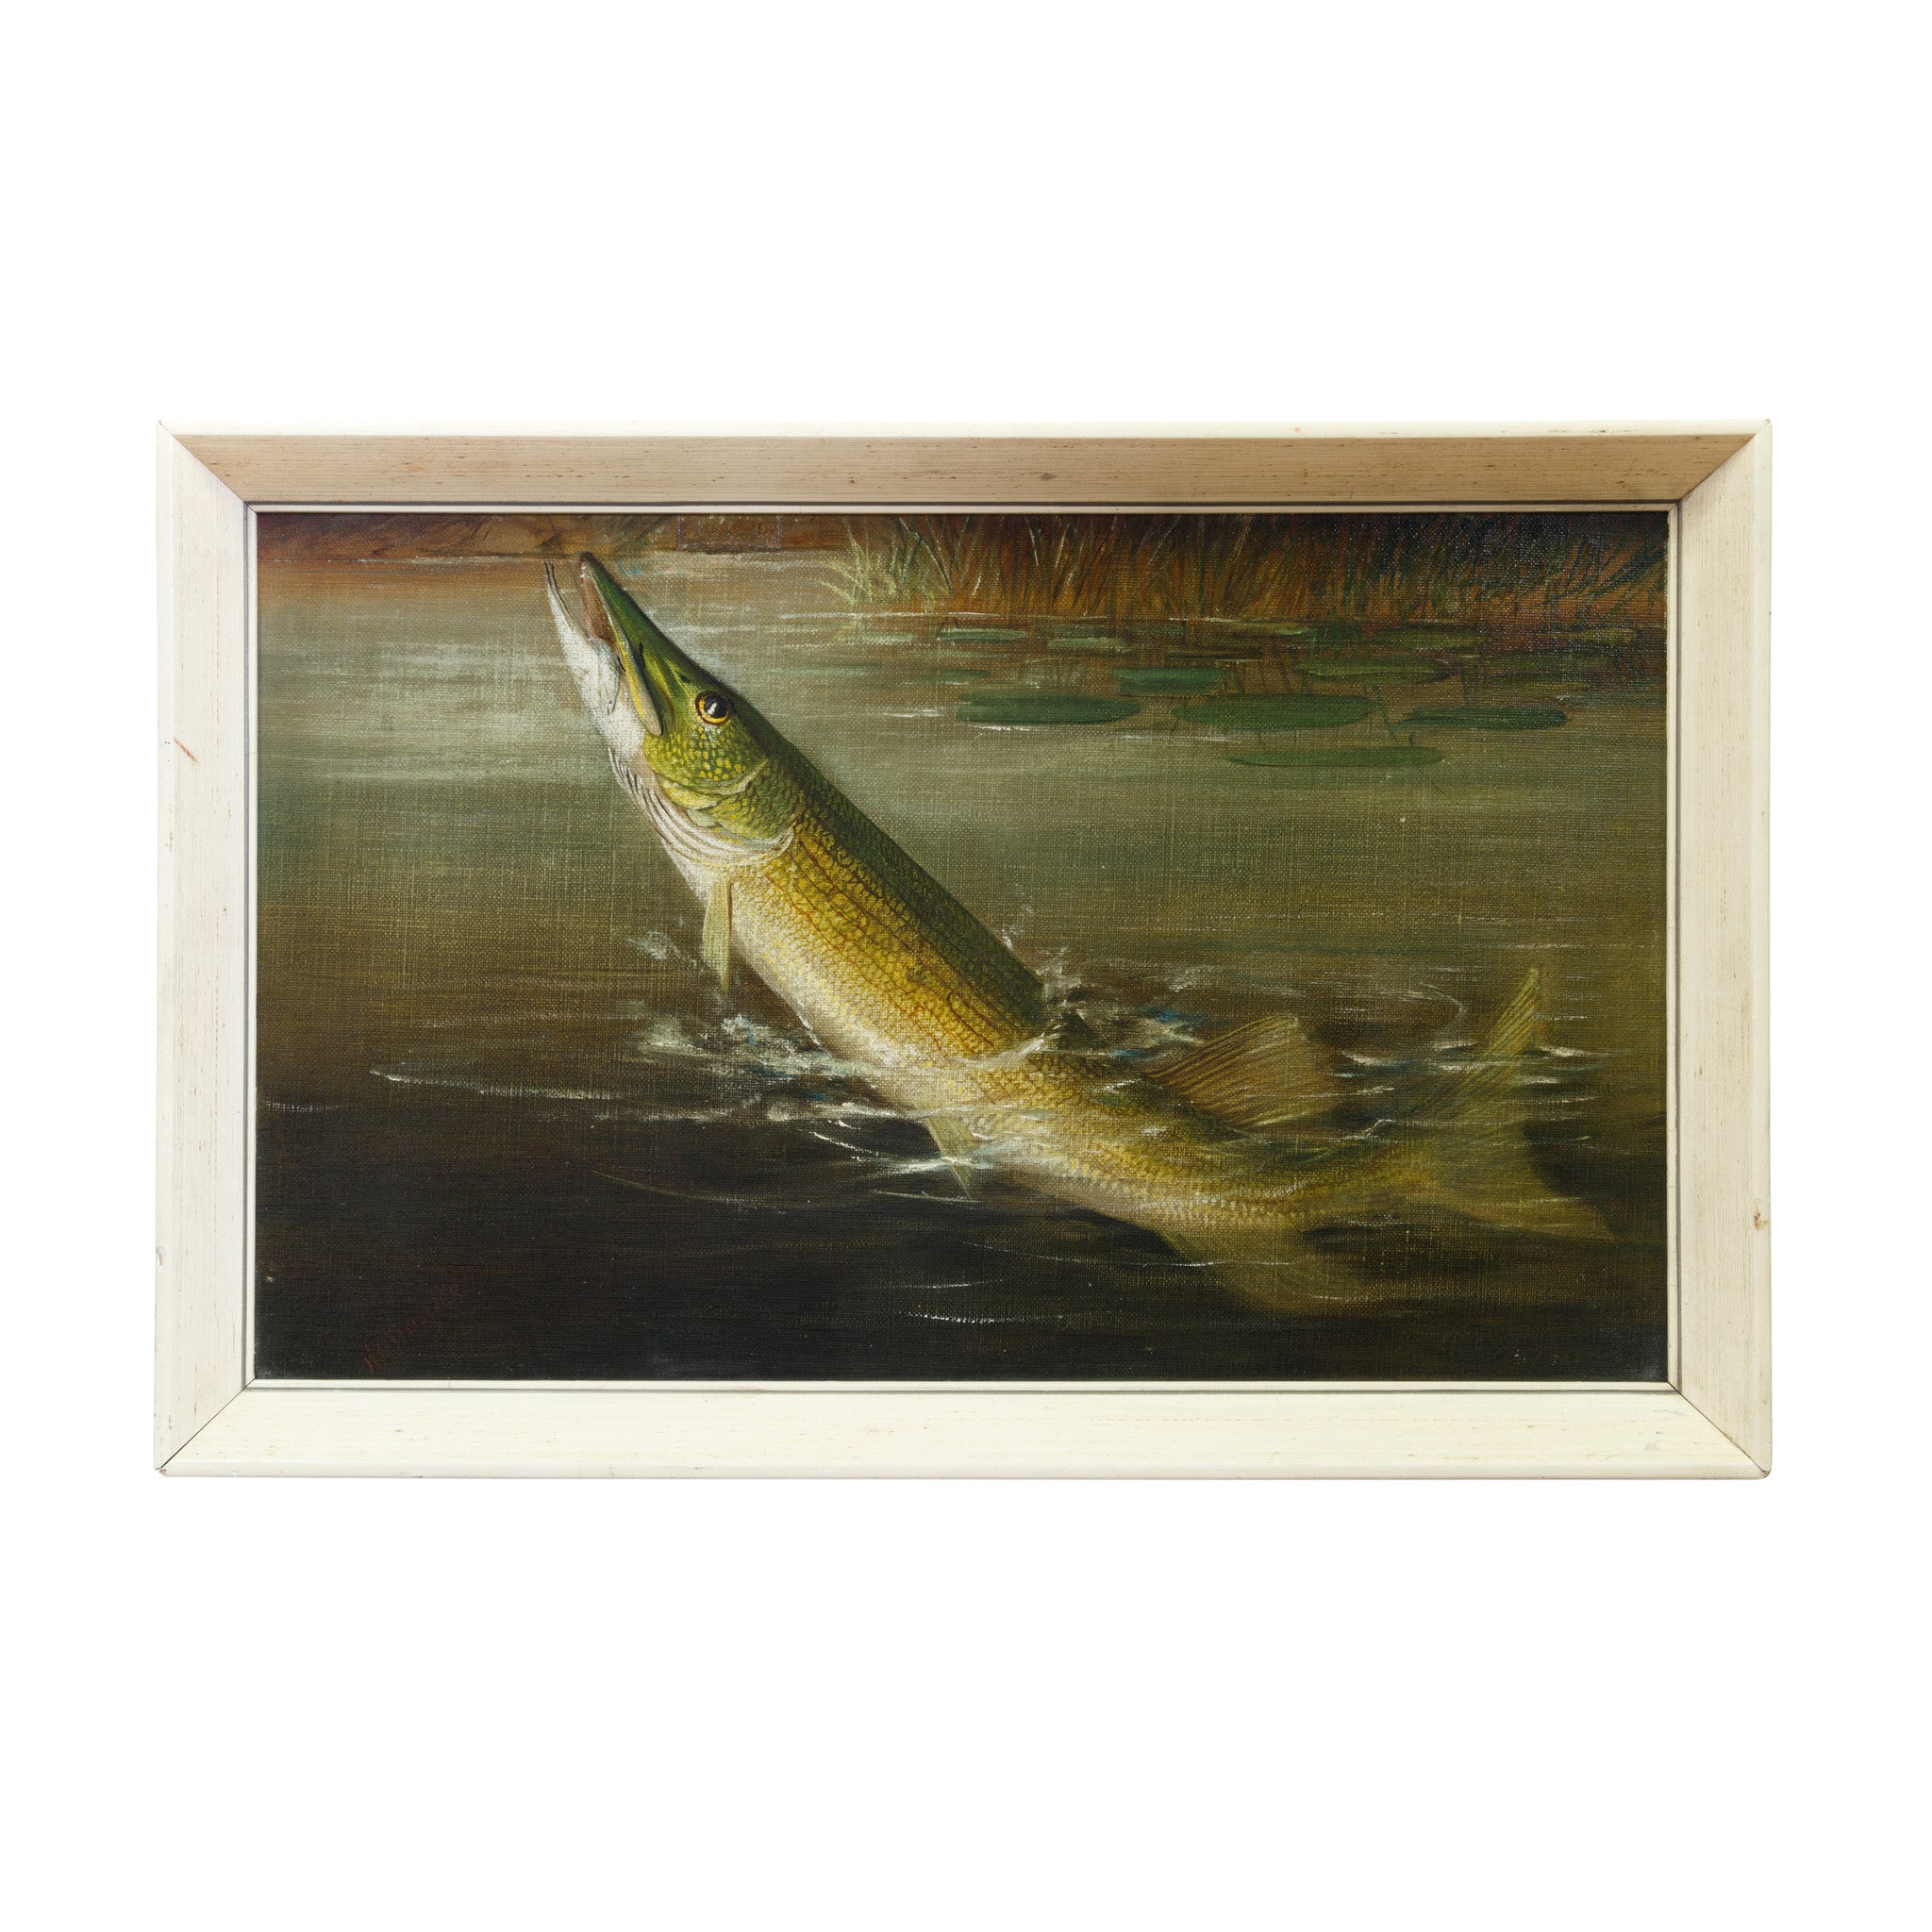 Hooked Pickerel by H.A. Driscole